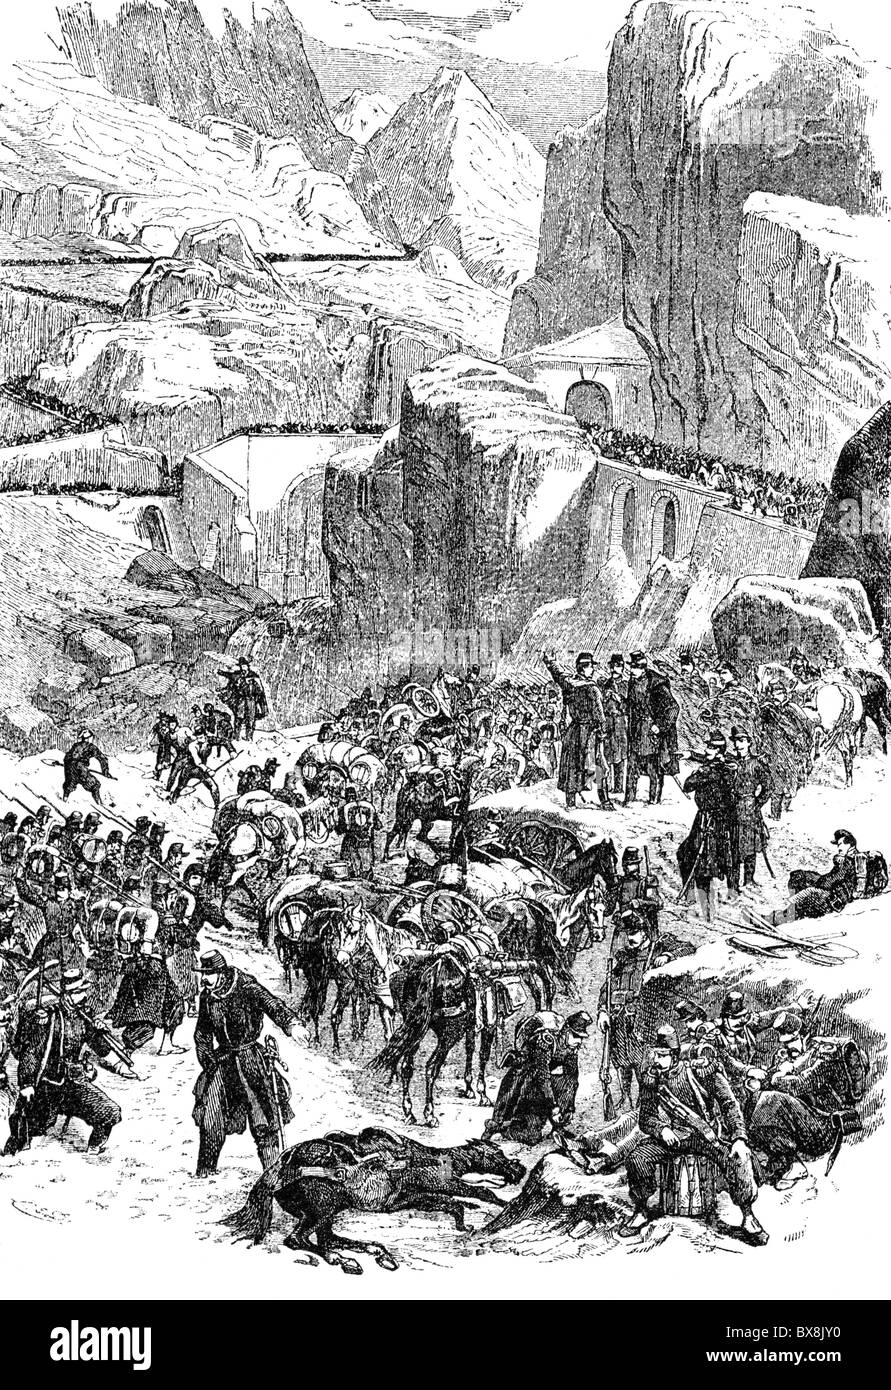 events, Austro-Sardinian War 1859, the French crossing the Mont Cenis, May 1859, wood engraving, 1859, France, Italy, Italian Independence, risorgimento, alp, mountains, gap, soldiers, column, Austro - Sardinian, historic, historical, 19th century, people, Additional-Rights-Clearences-Not Available Stock Photo